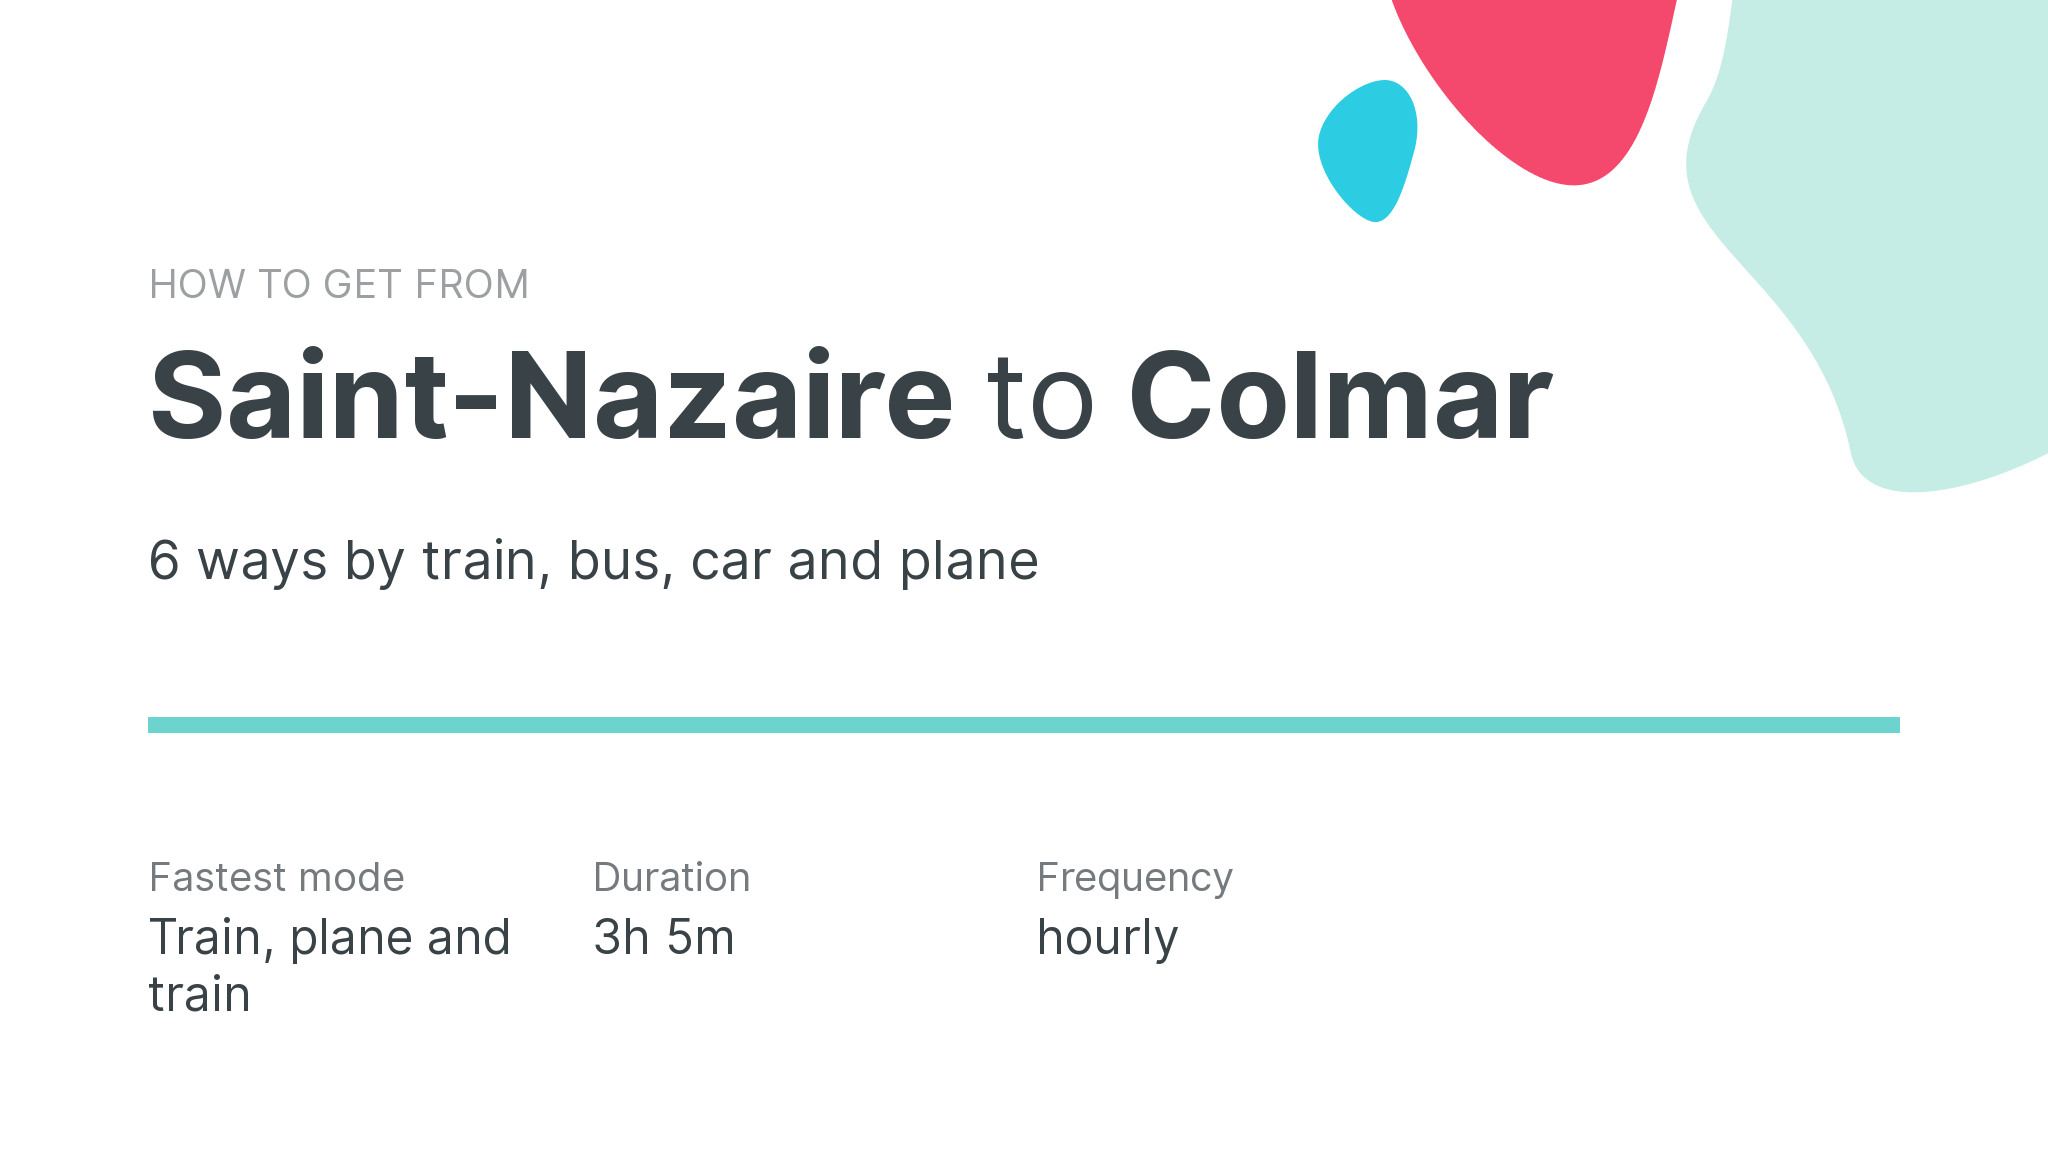 How do I get from Saint-Nazaire to Colmar